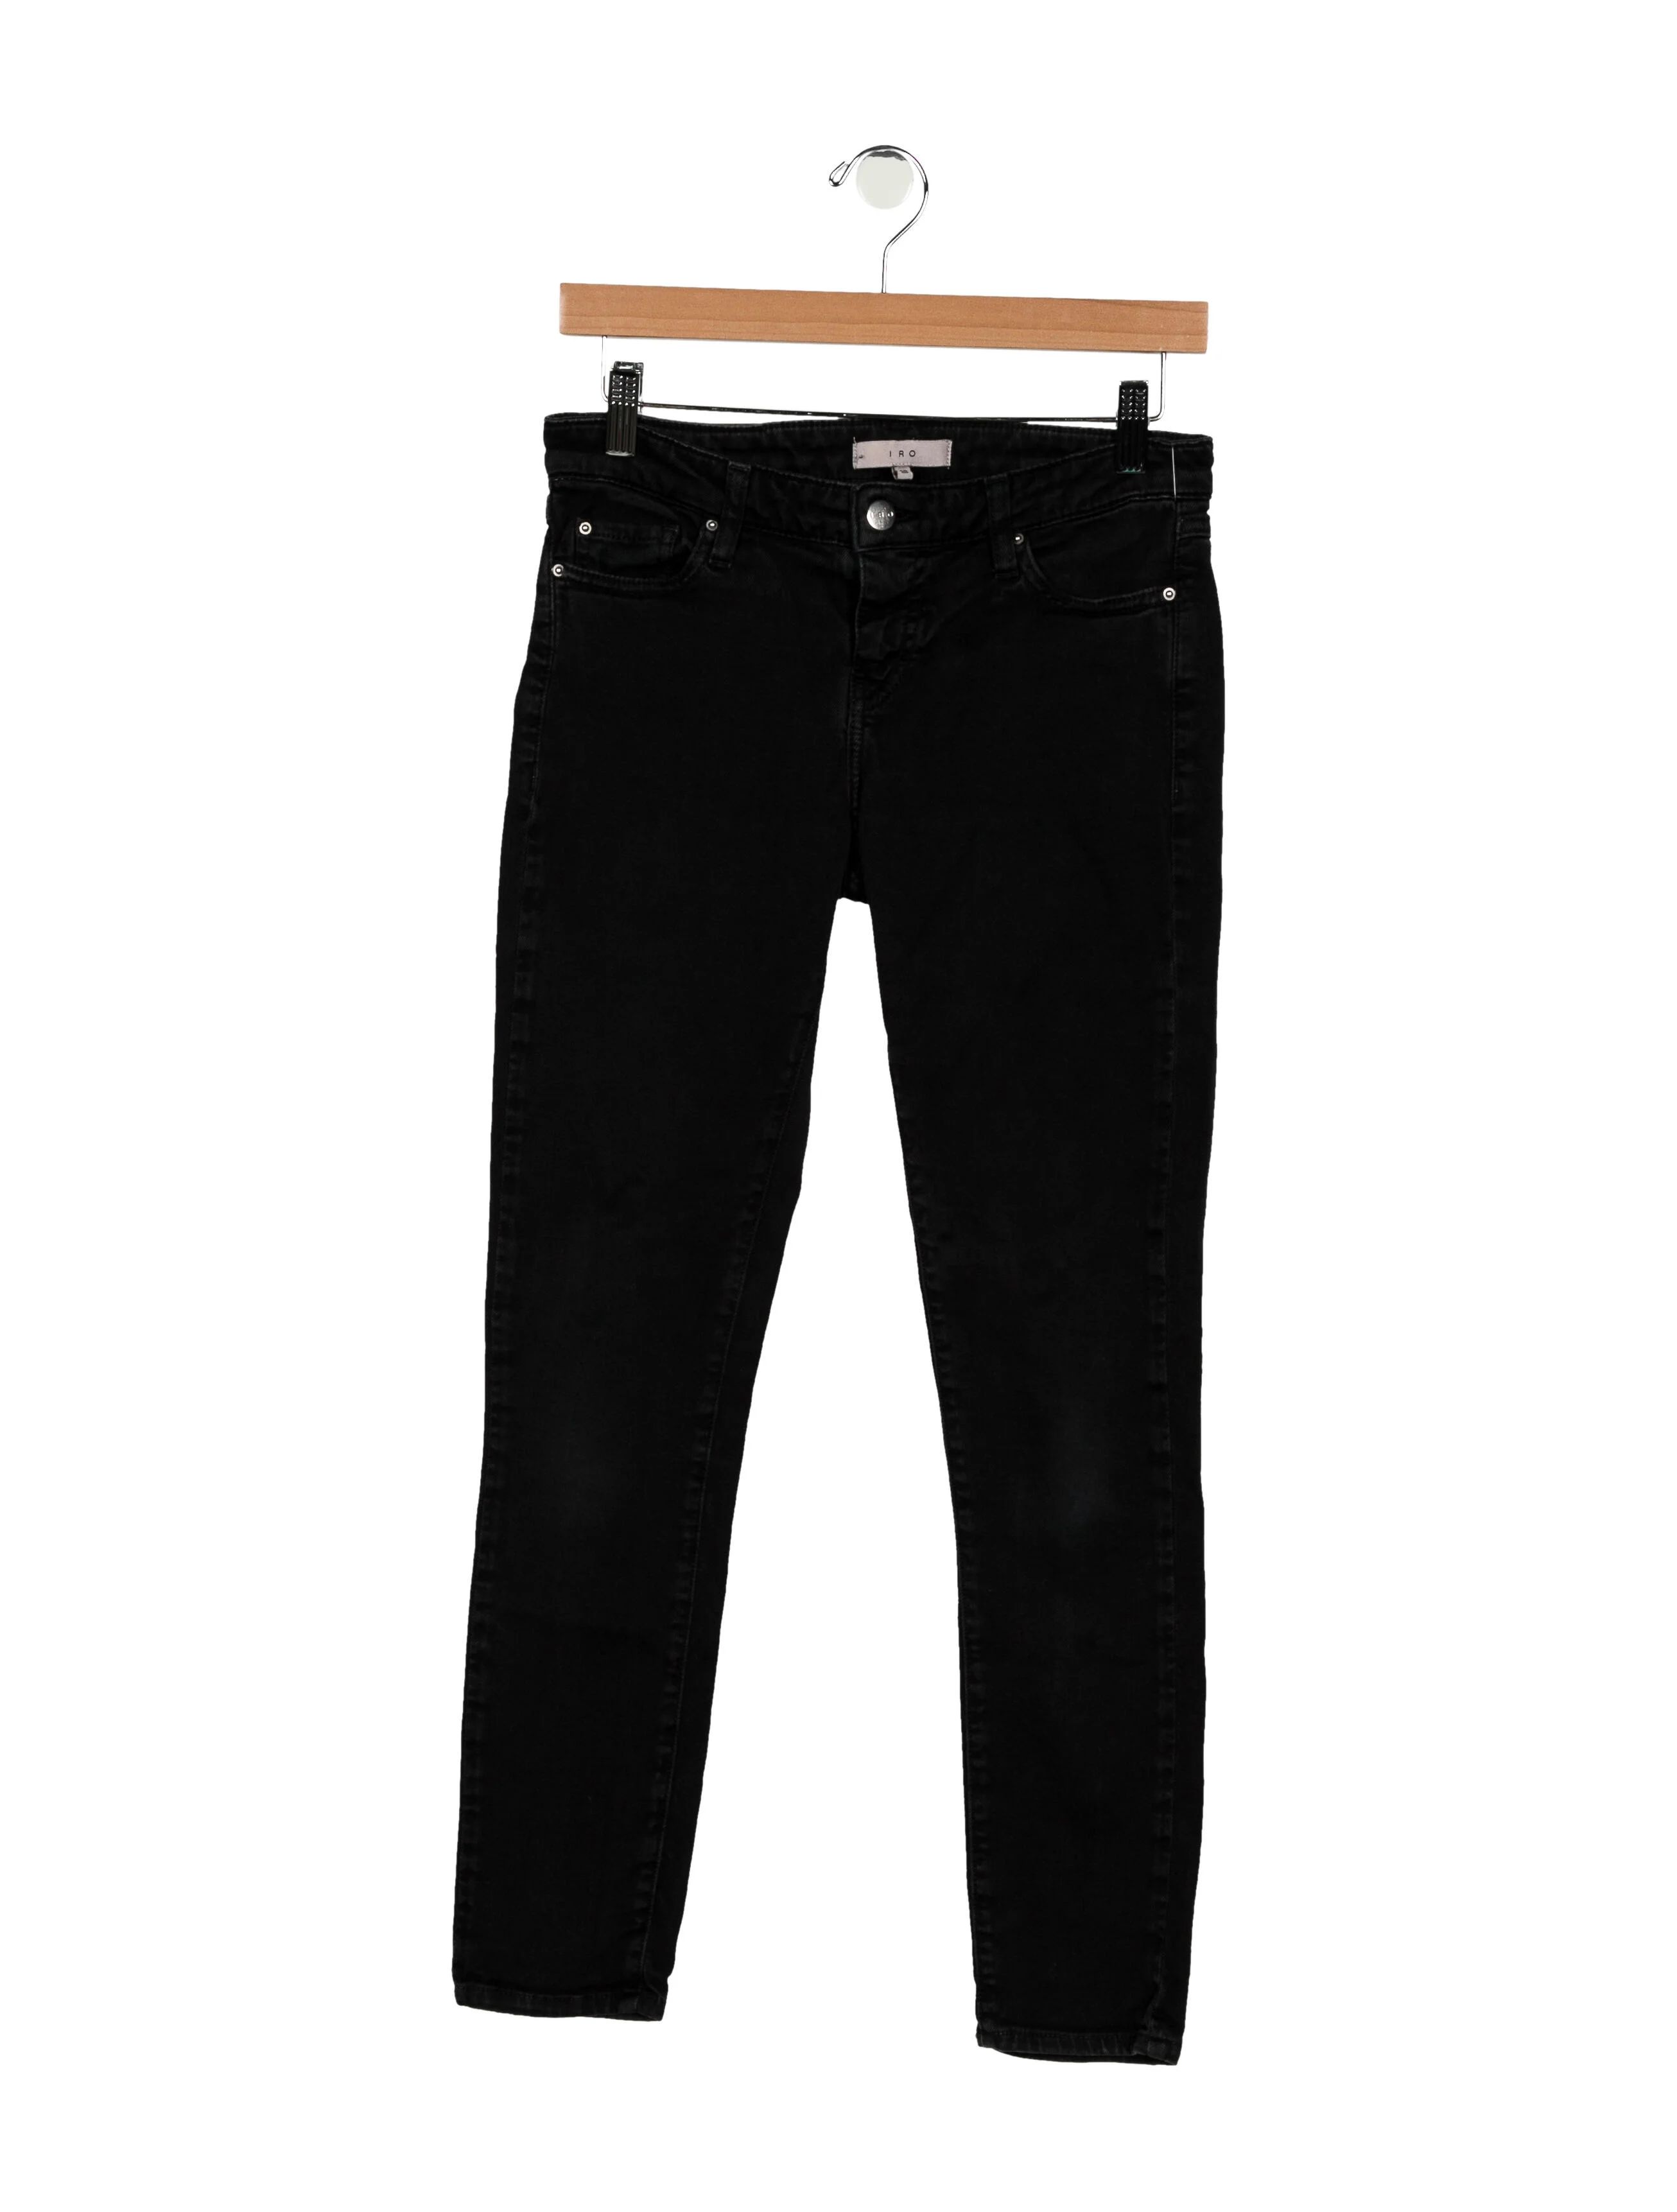 Low-Rise Skinny Leg Jeans | The RealReal